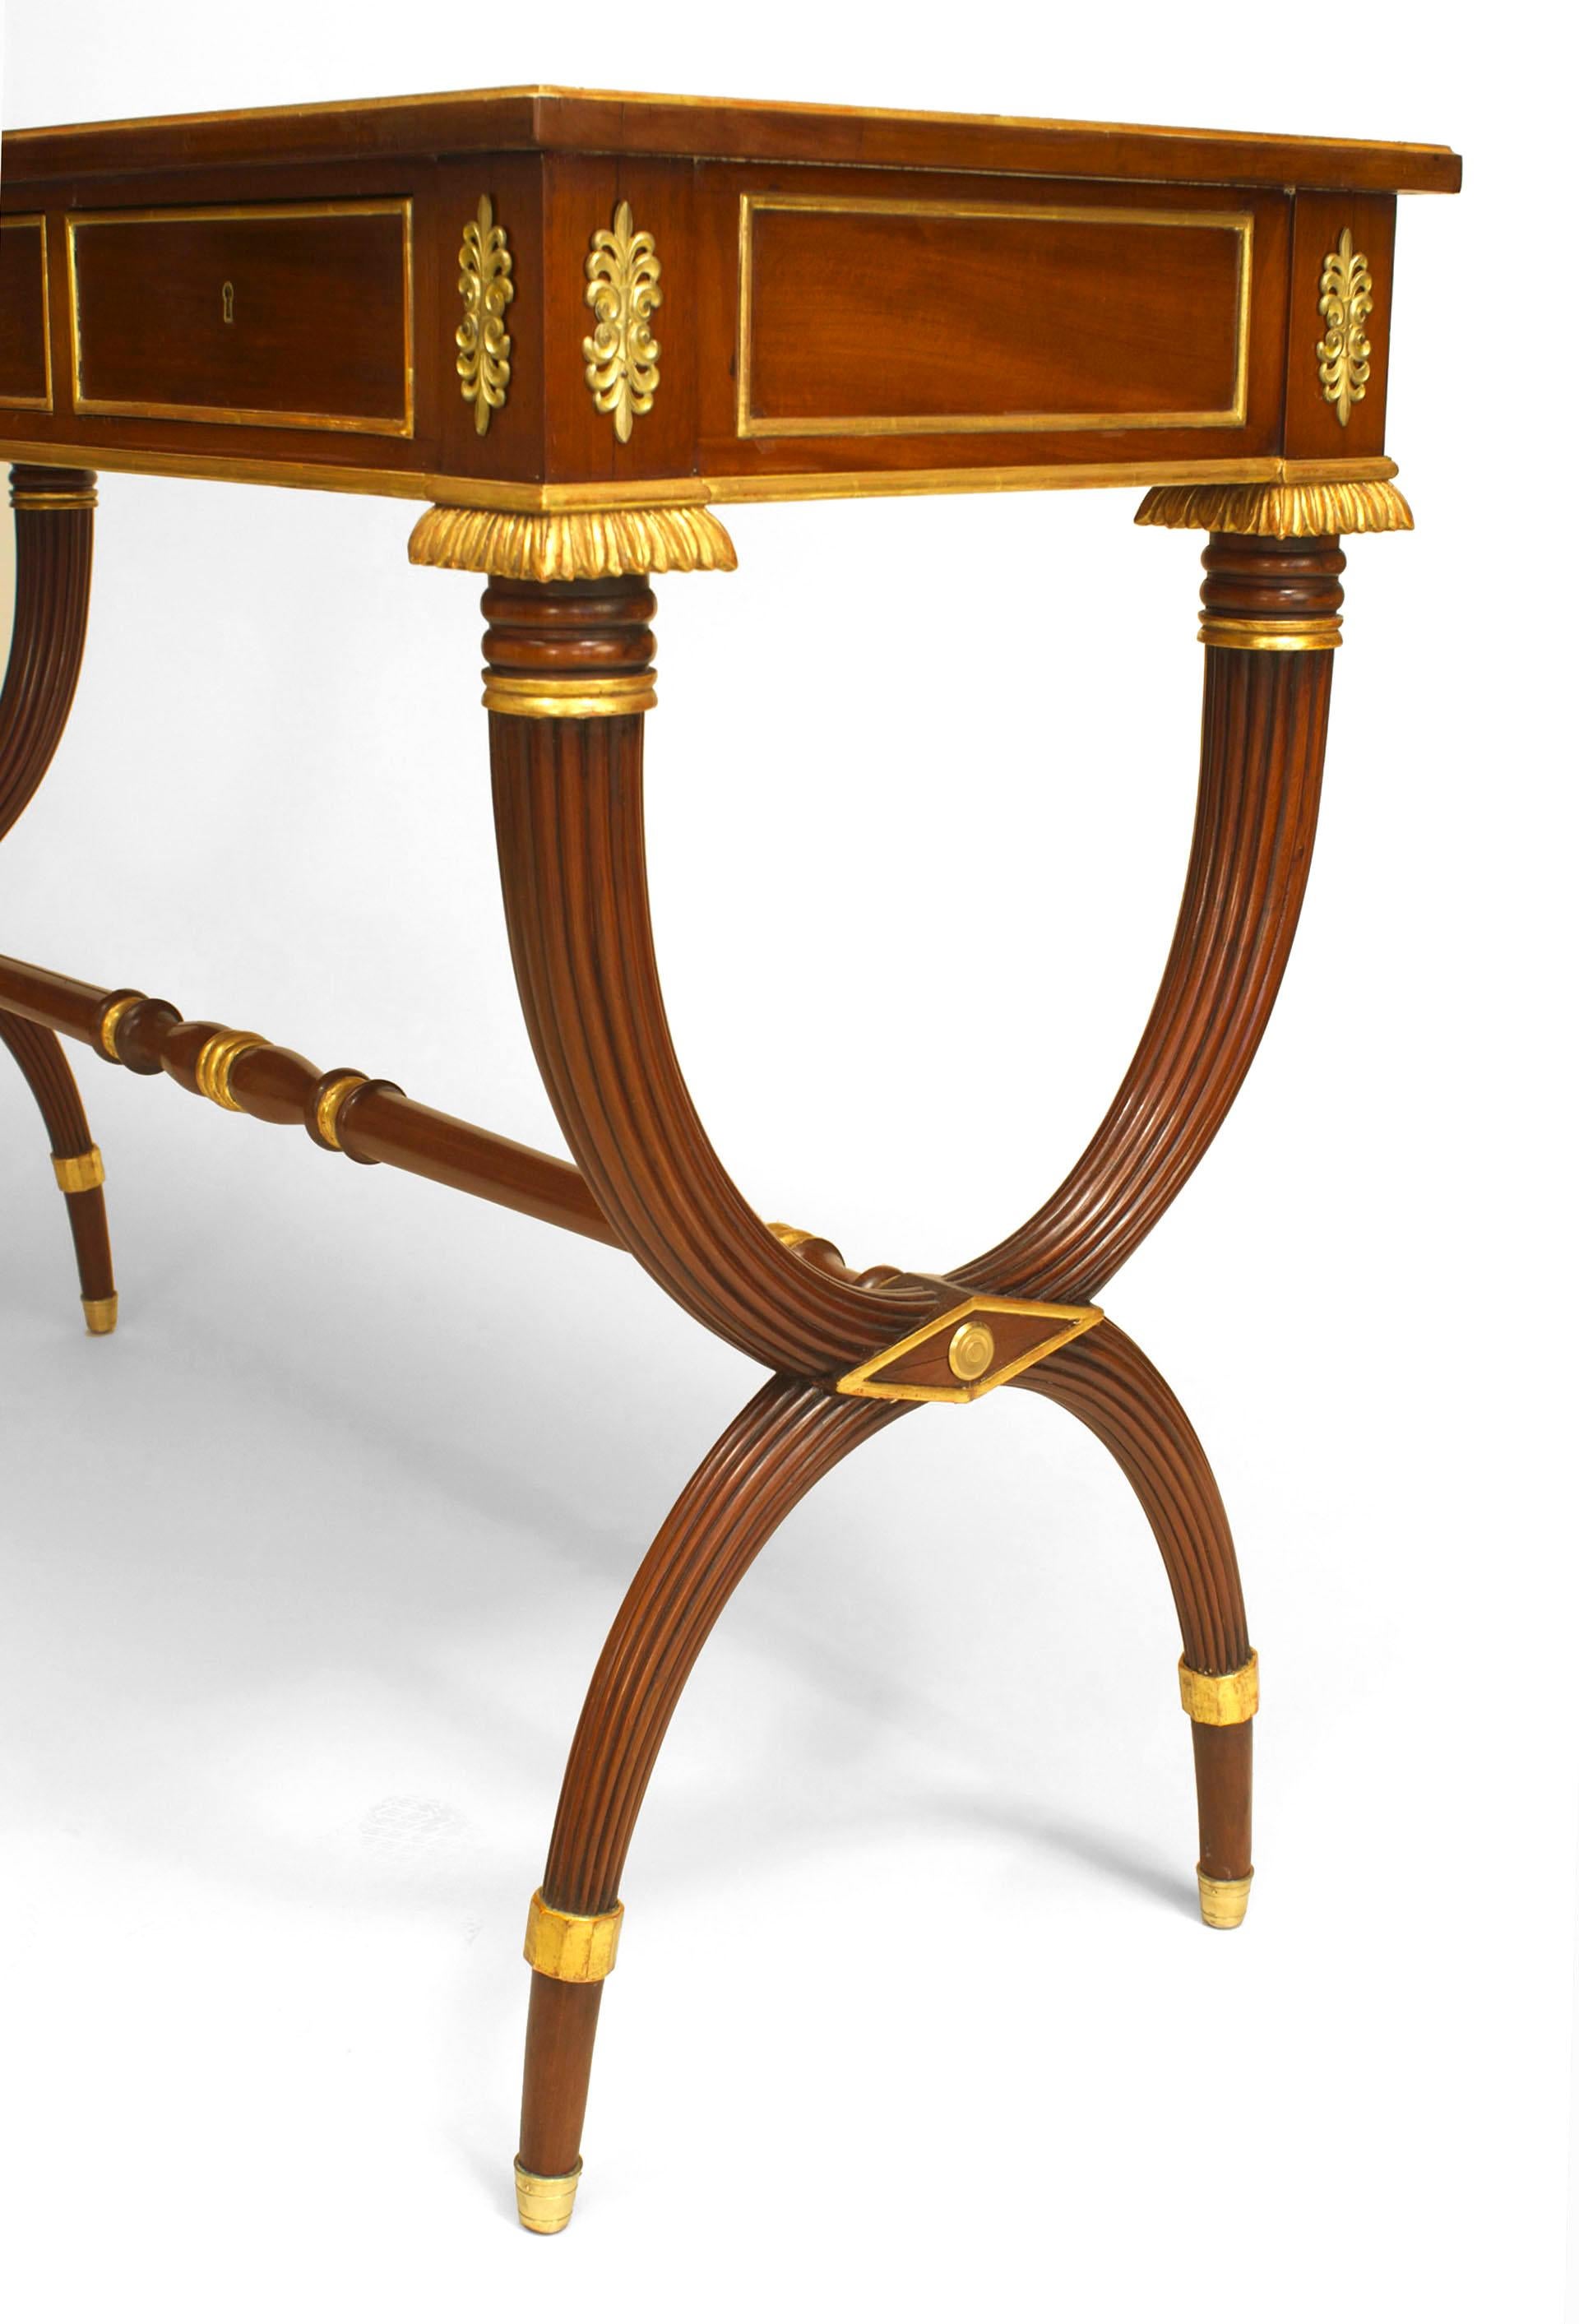 19th Century Pair of English Regency Mahogany Console Tables For Sale